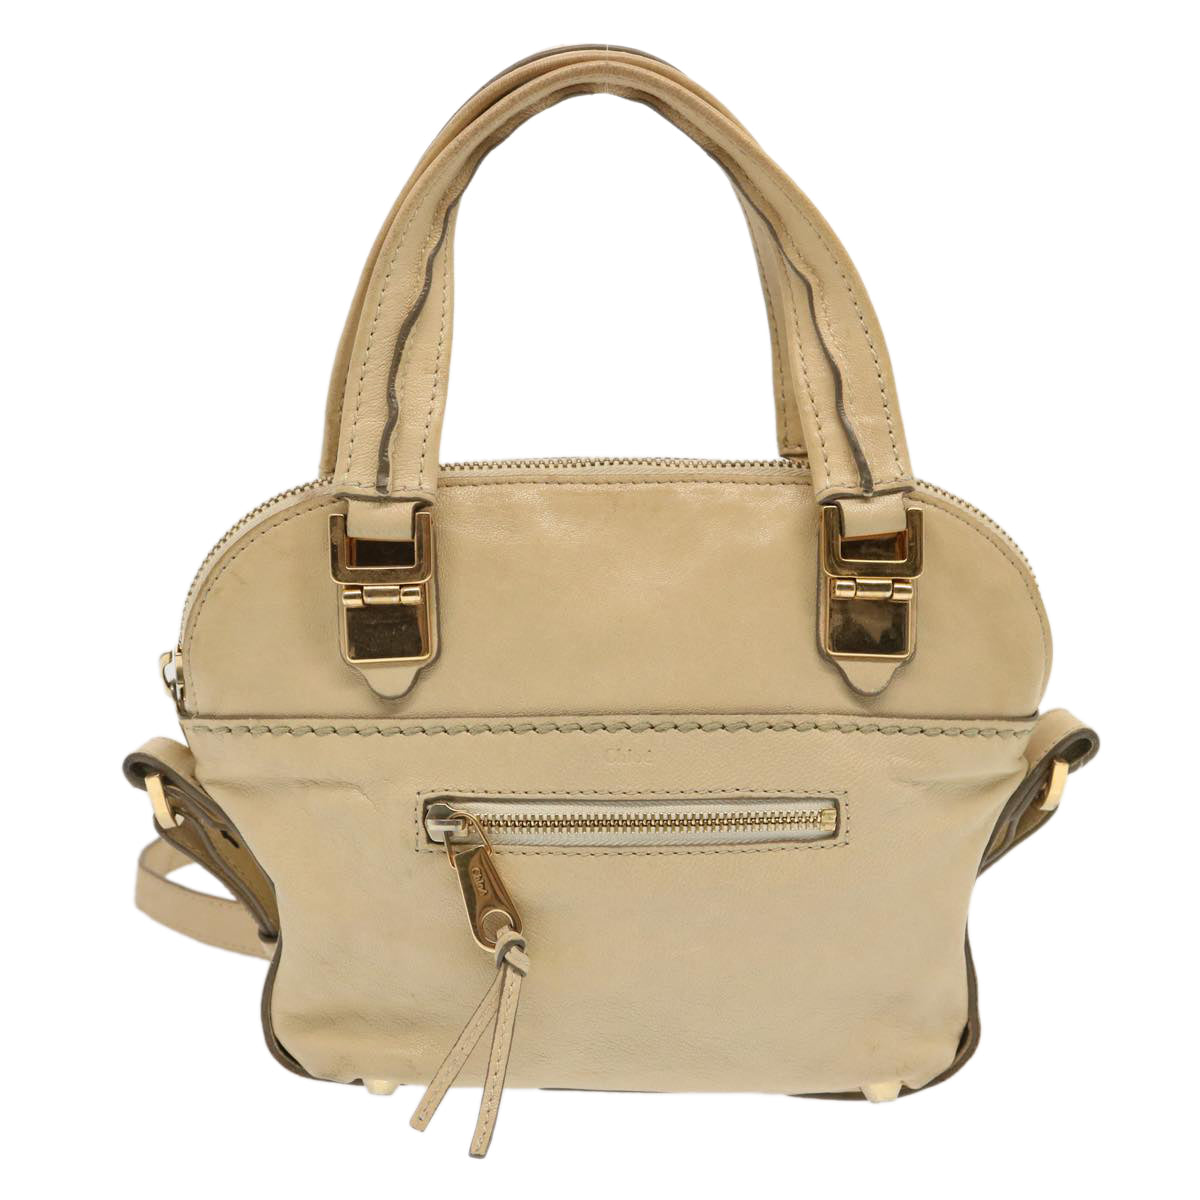 Chloe Hand Bag Leather 2way Beige Auth bs13698 - 0